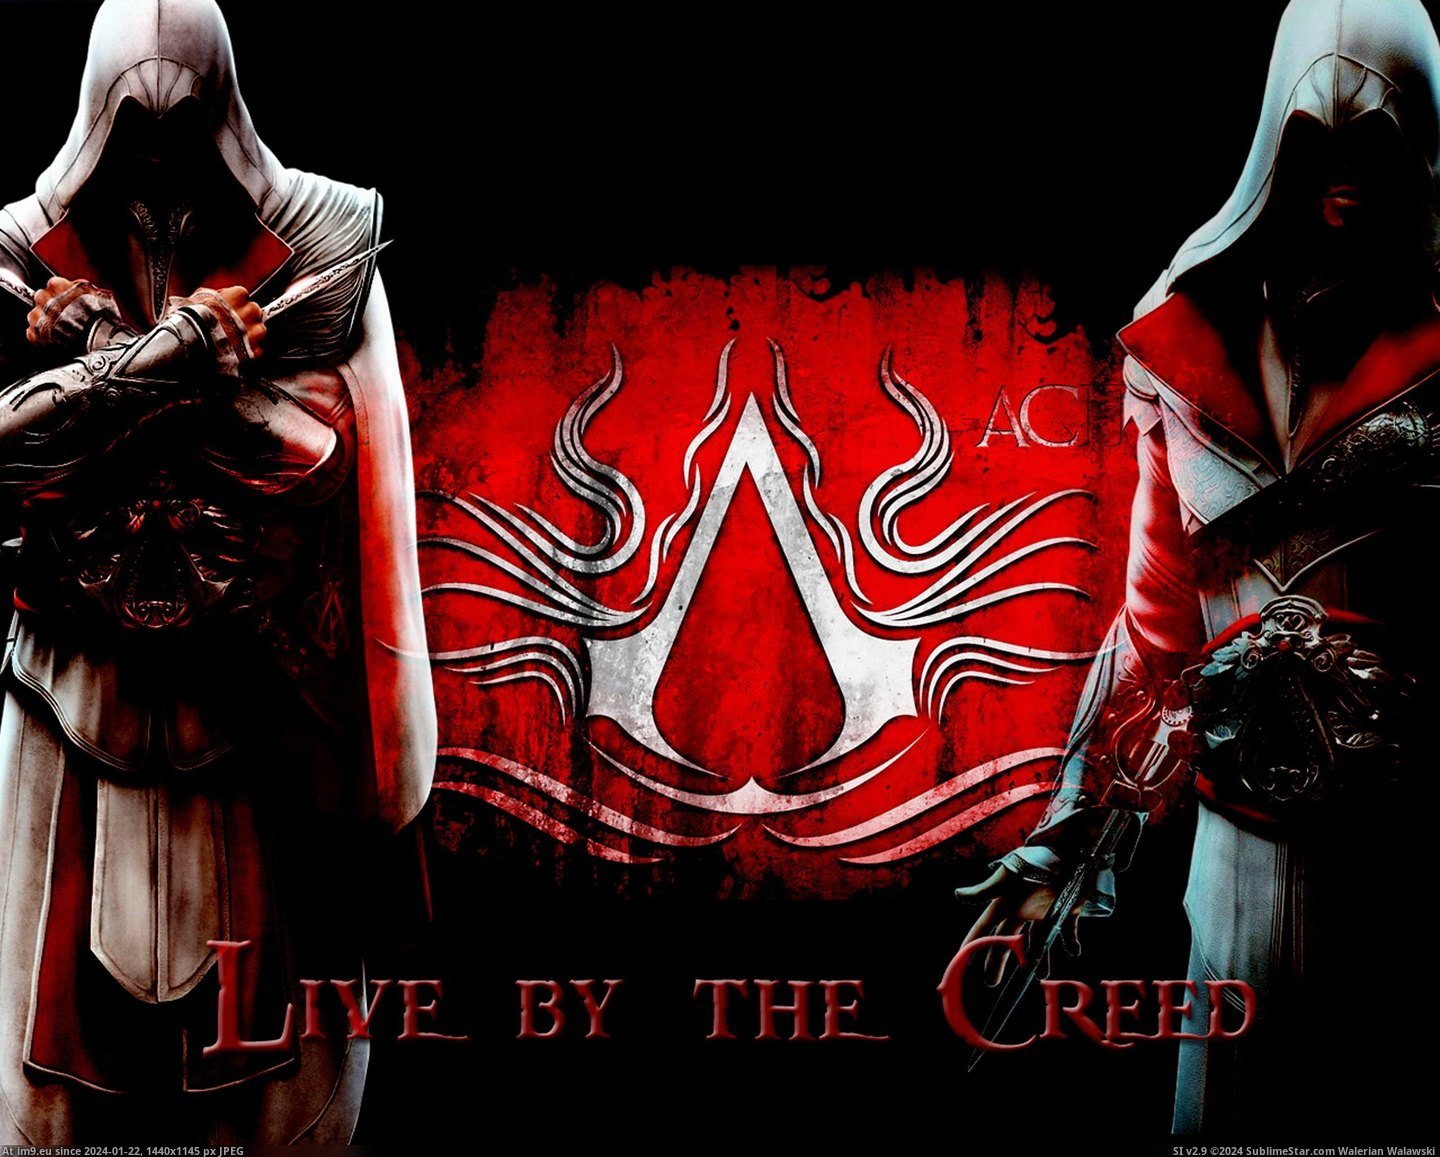 #Game #Creed #Assassin #Video Video Game Assassin'S Creed 195657 Pic. (Obraz z album Games Wallpapers))